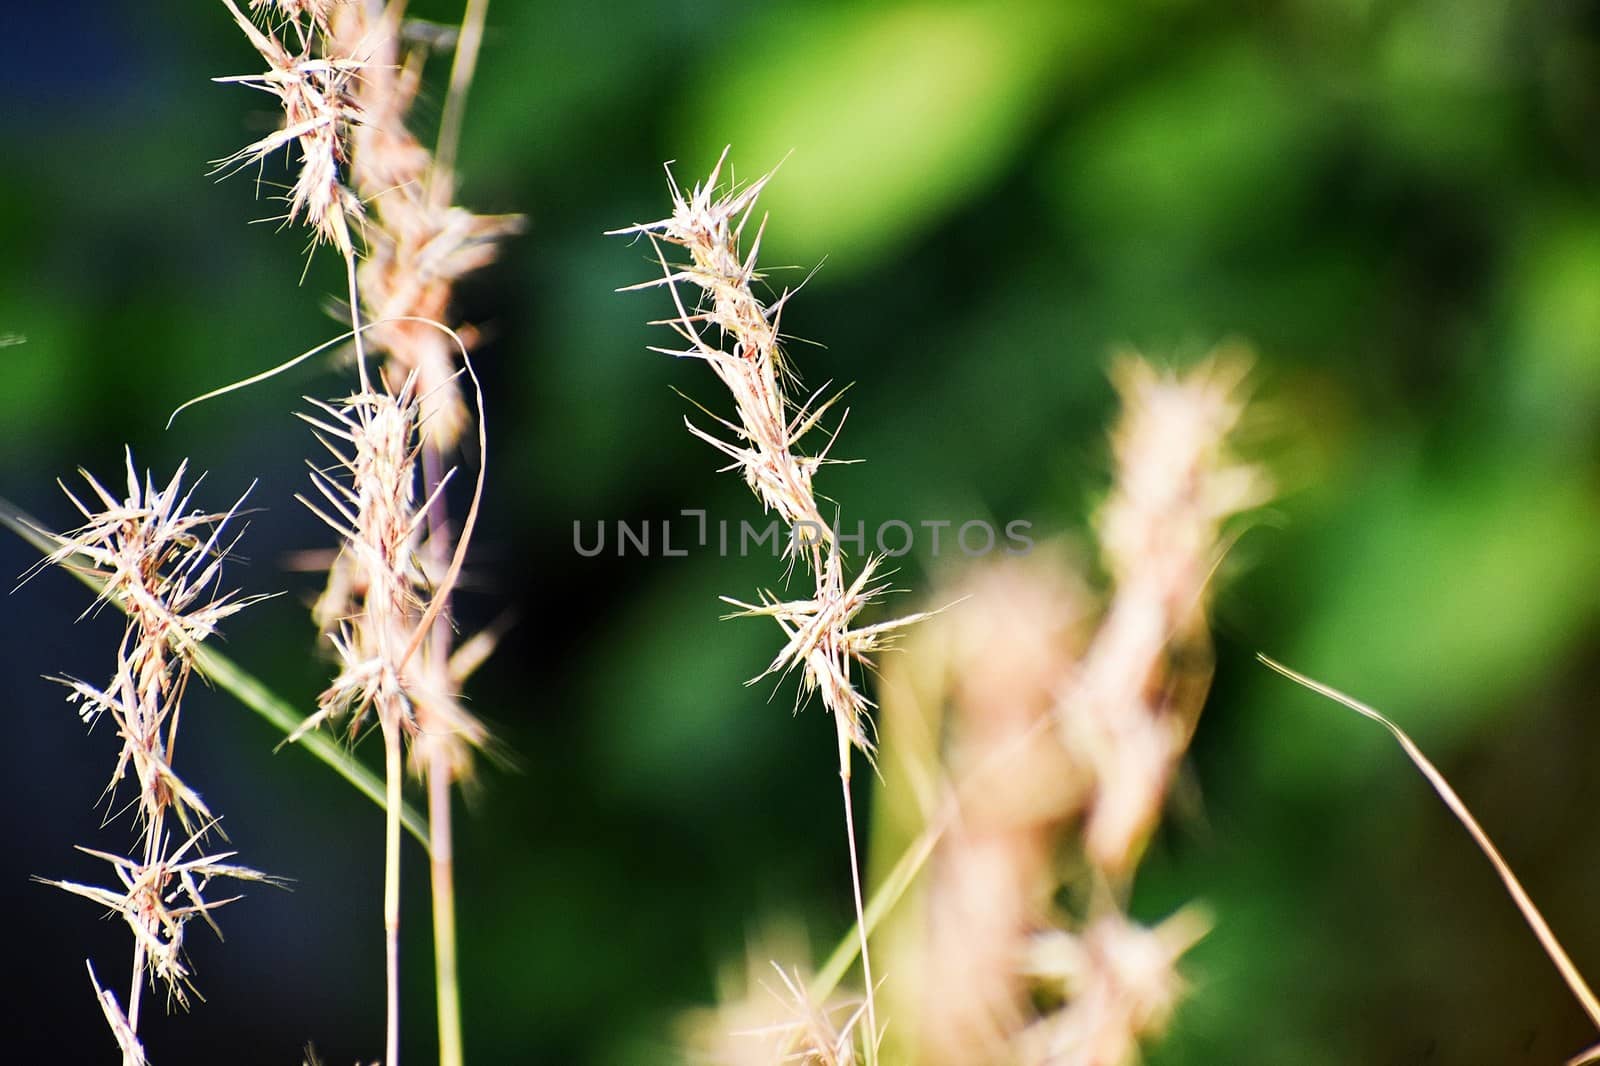 Grass and its flowers by ravindrabhu165165@gmail.com